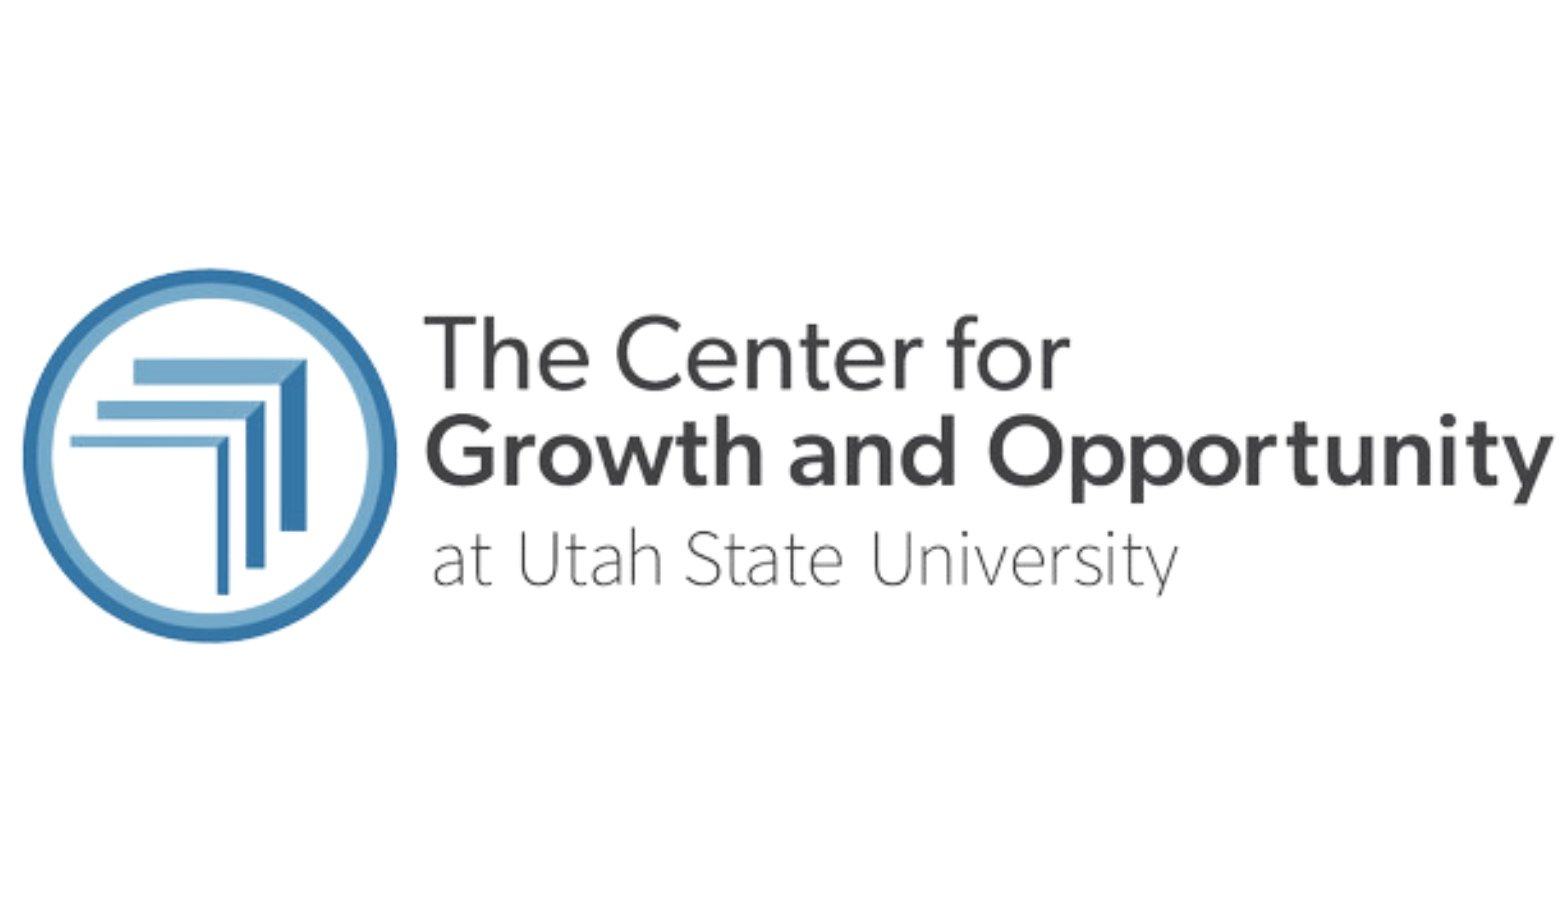 The Center for Growth and Opportunity at Utah State University